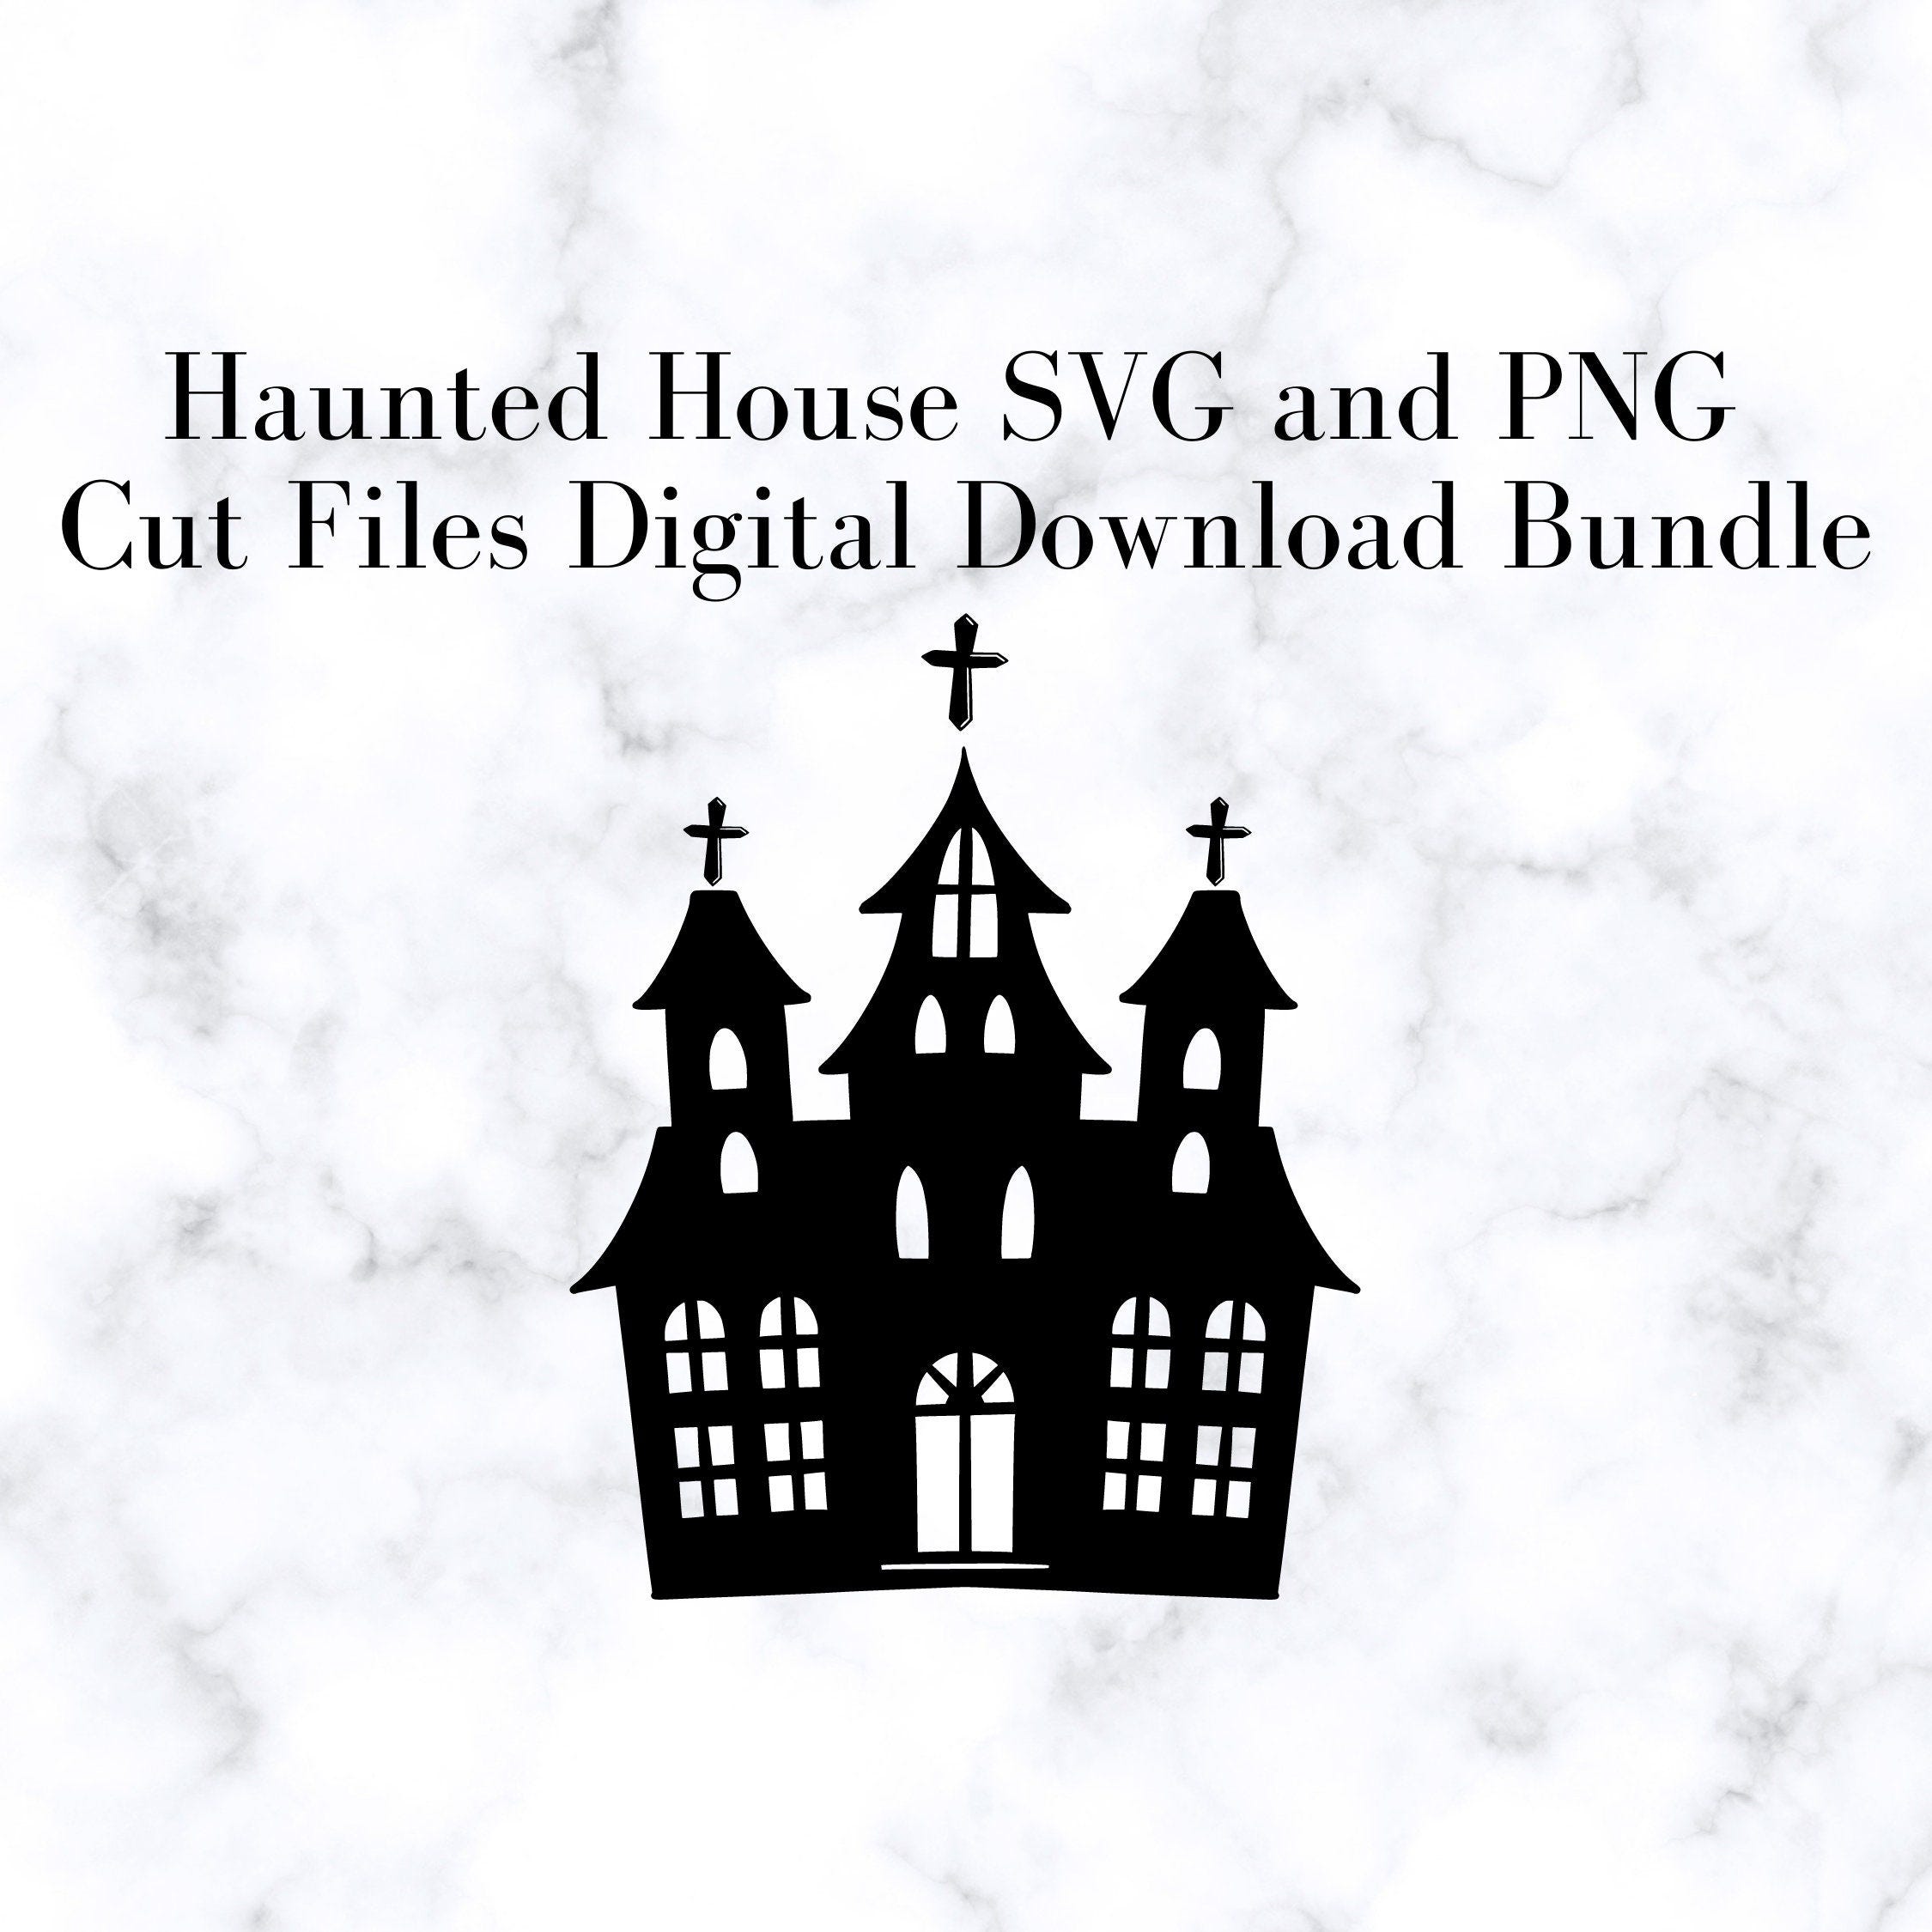 Haunted House SVG and PNG Cut Files, Digital Download Bundle